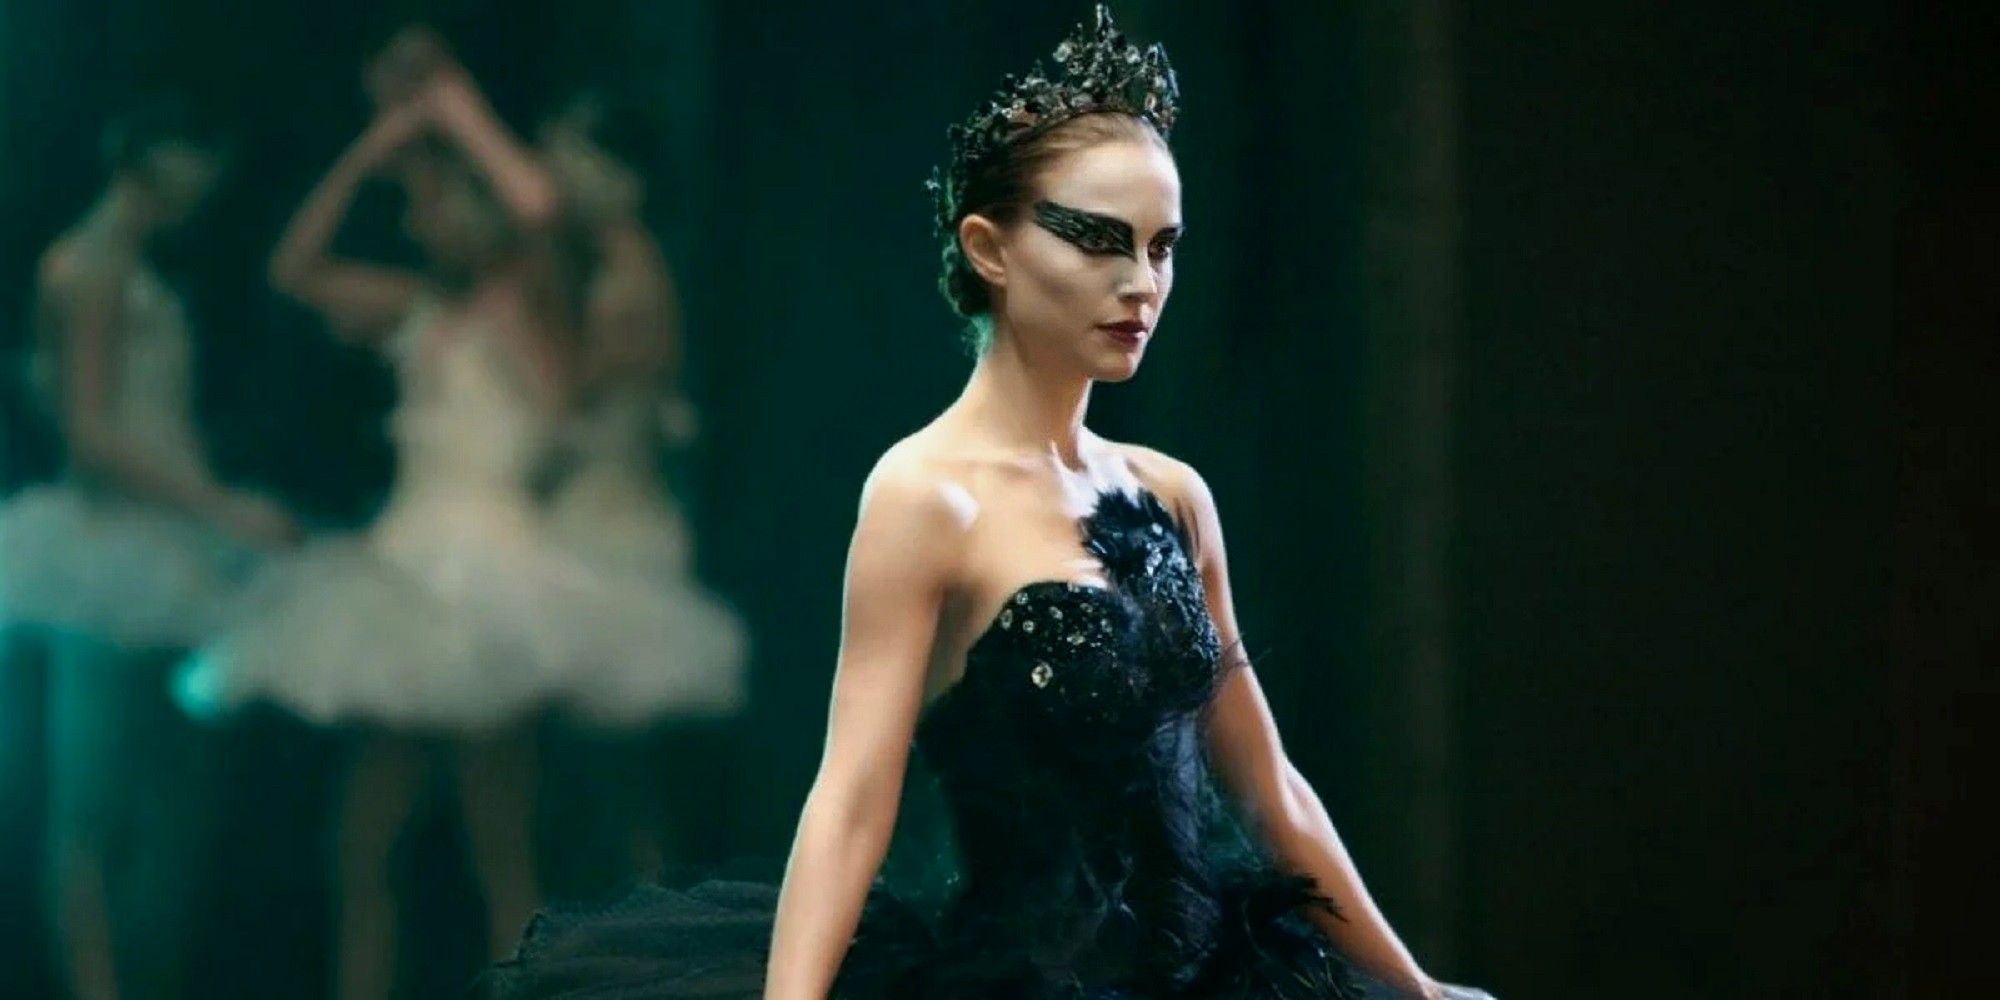 Black Swan - Nina standing and looking at the side